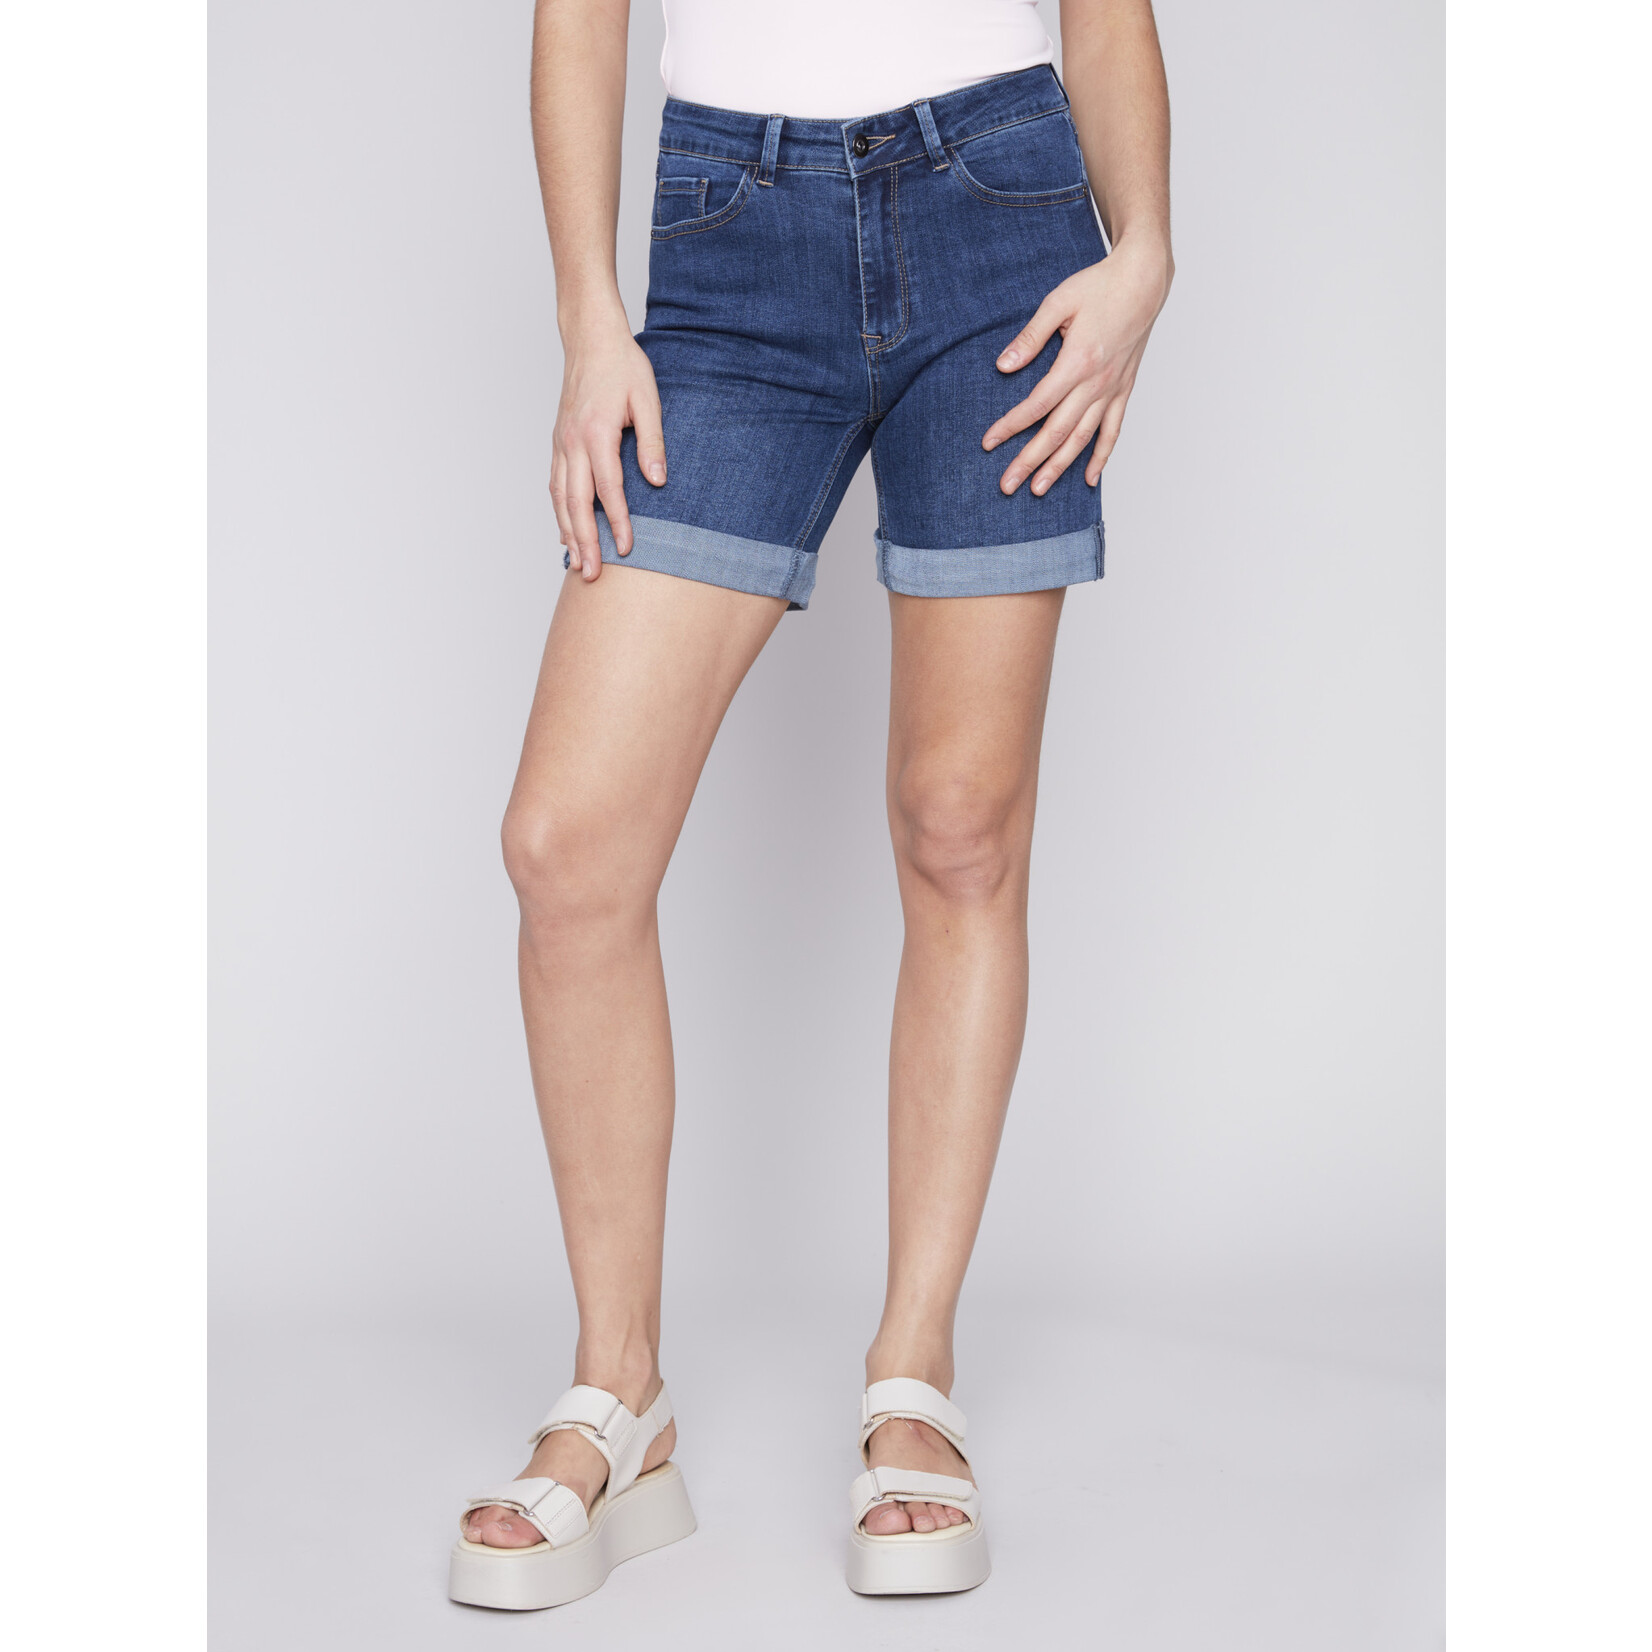 Charlie B Rolled Up Cuff Short